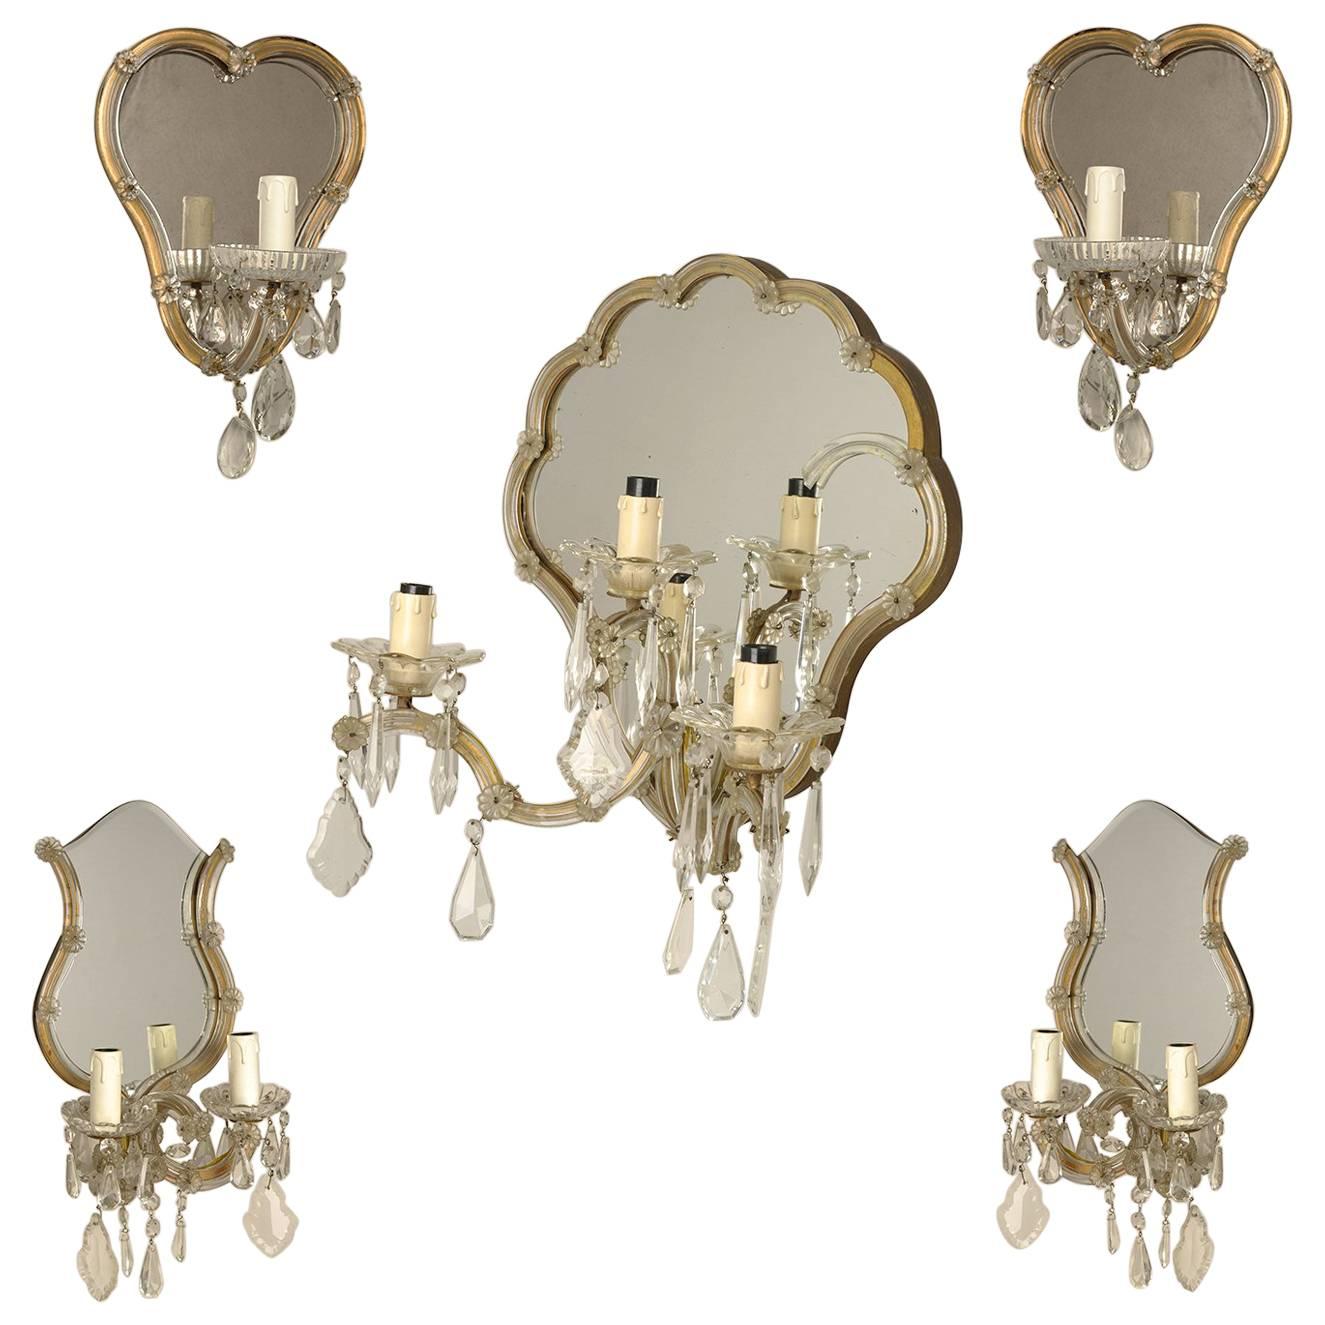  Vintage Murano Crystal Mirrored Sconces, Divisible